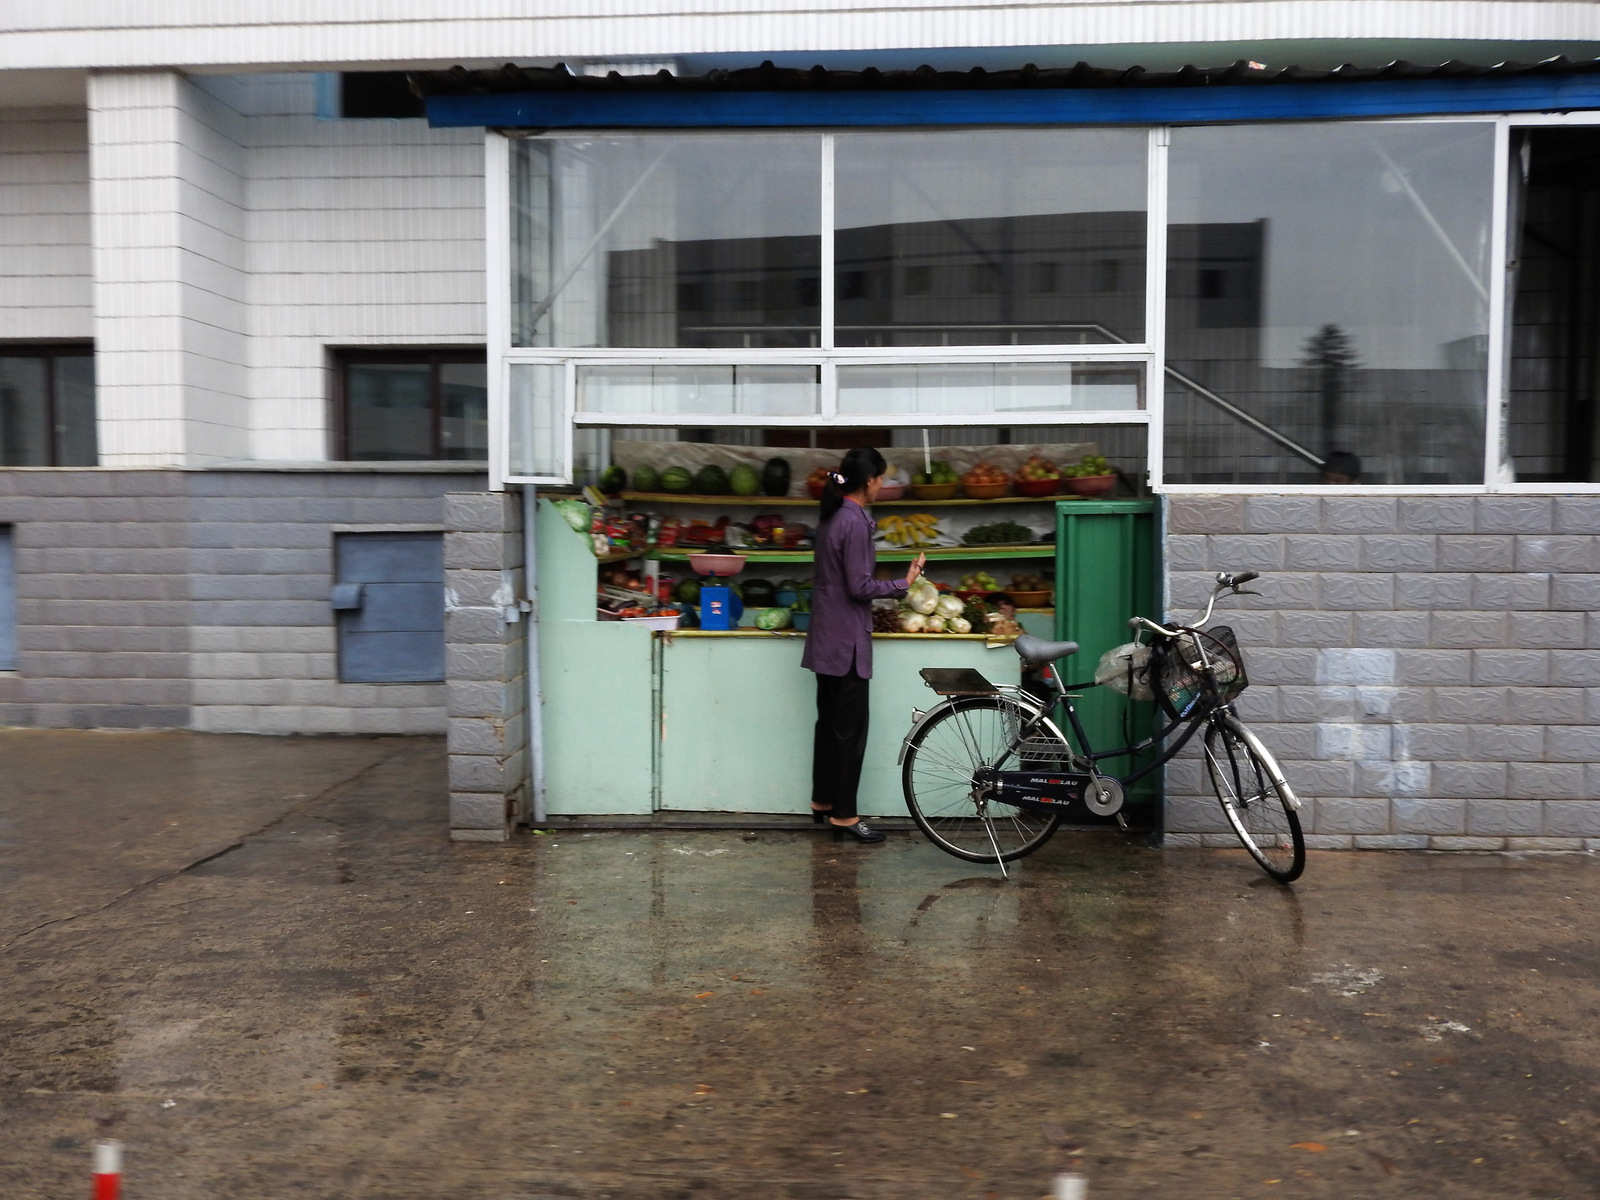 Fruit stand seen in Pyongyang. Small stands this size also sell snack food, sweets, water, sodas, beer, and ice cream.